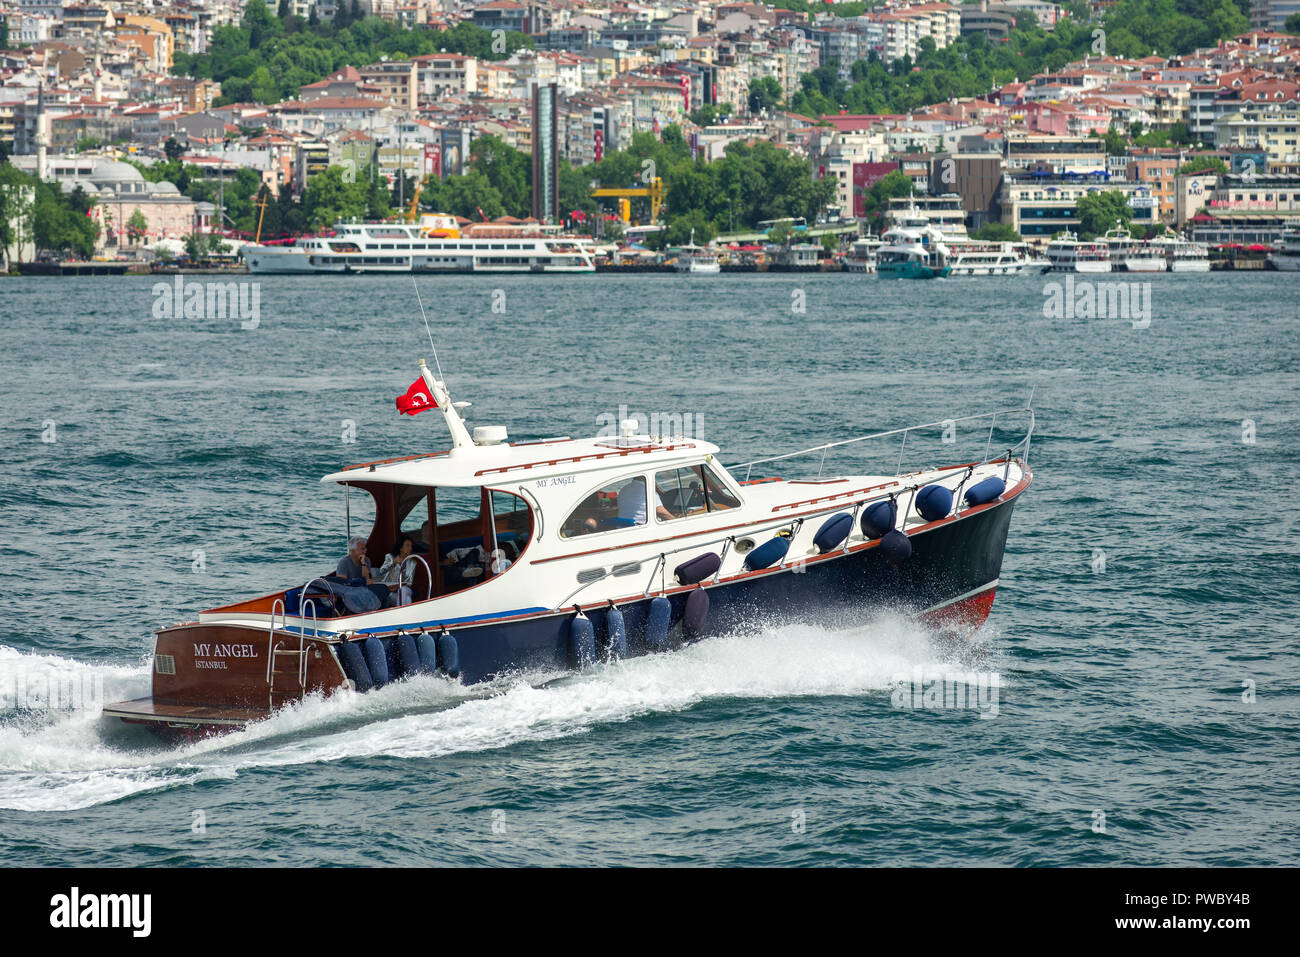 A small power boat sails on the Bosphorus with passengers in the rear, Istanbul, Turkey Stock Photo